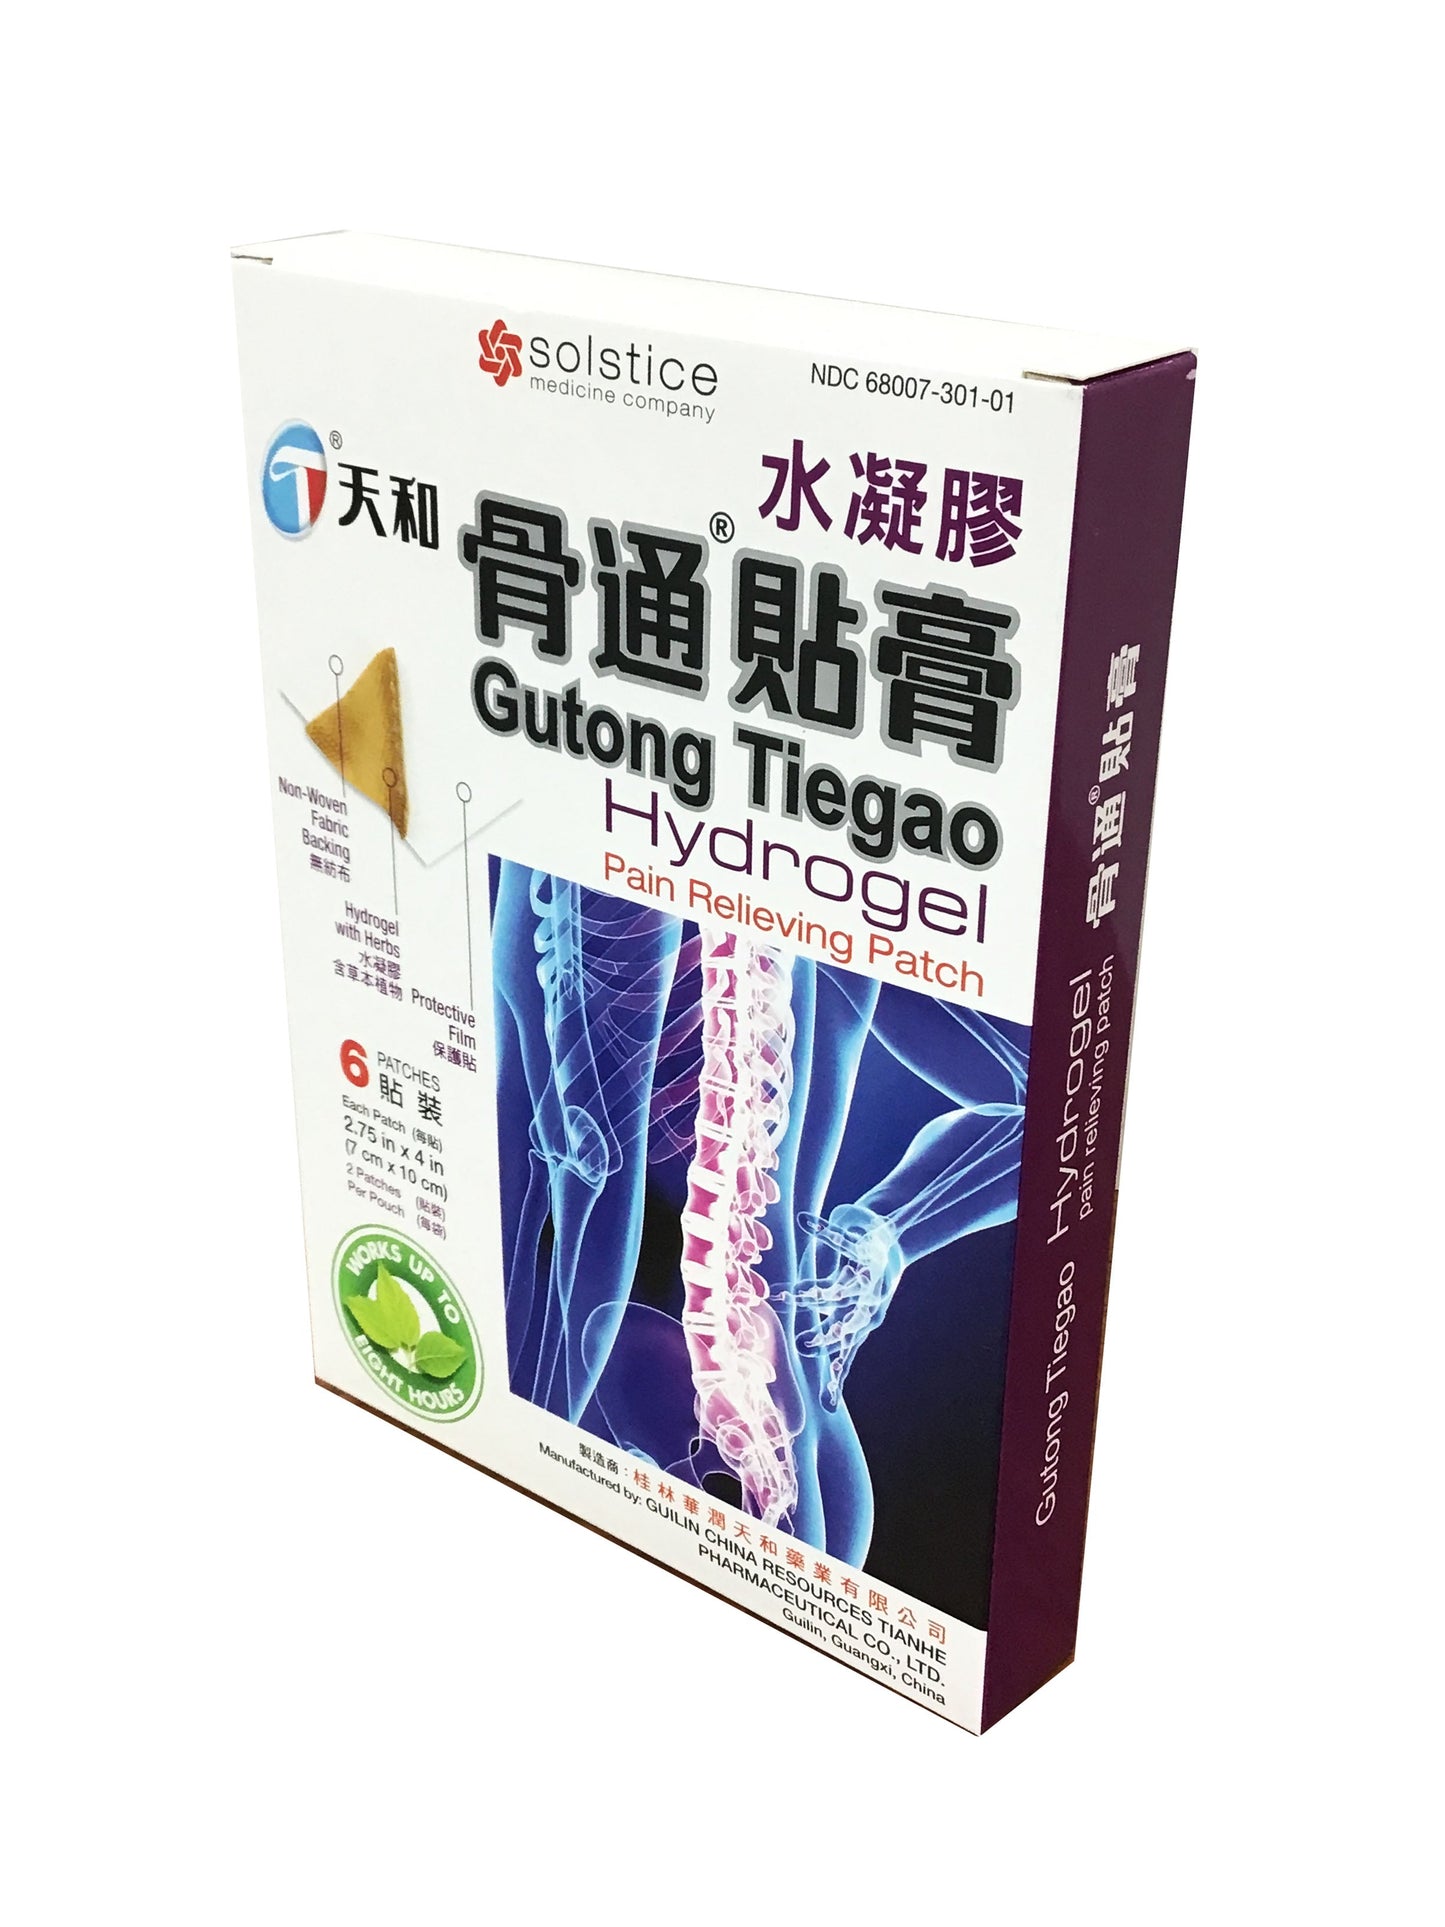 Gutong Tiegao Hydrogel Pain Relieving Patch (6 Patches) 天和 水凝膠骨诵貼膏(6貼裝)